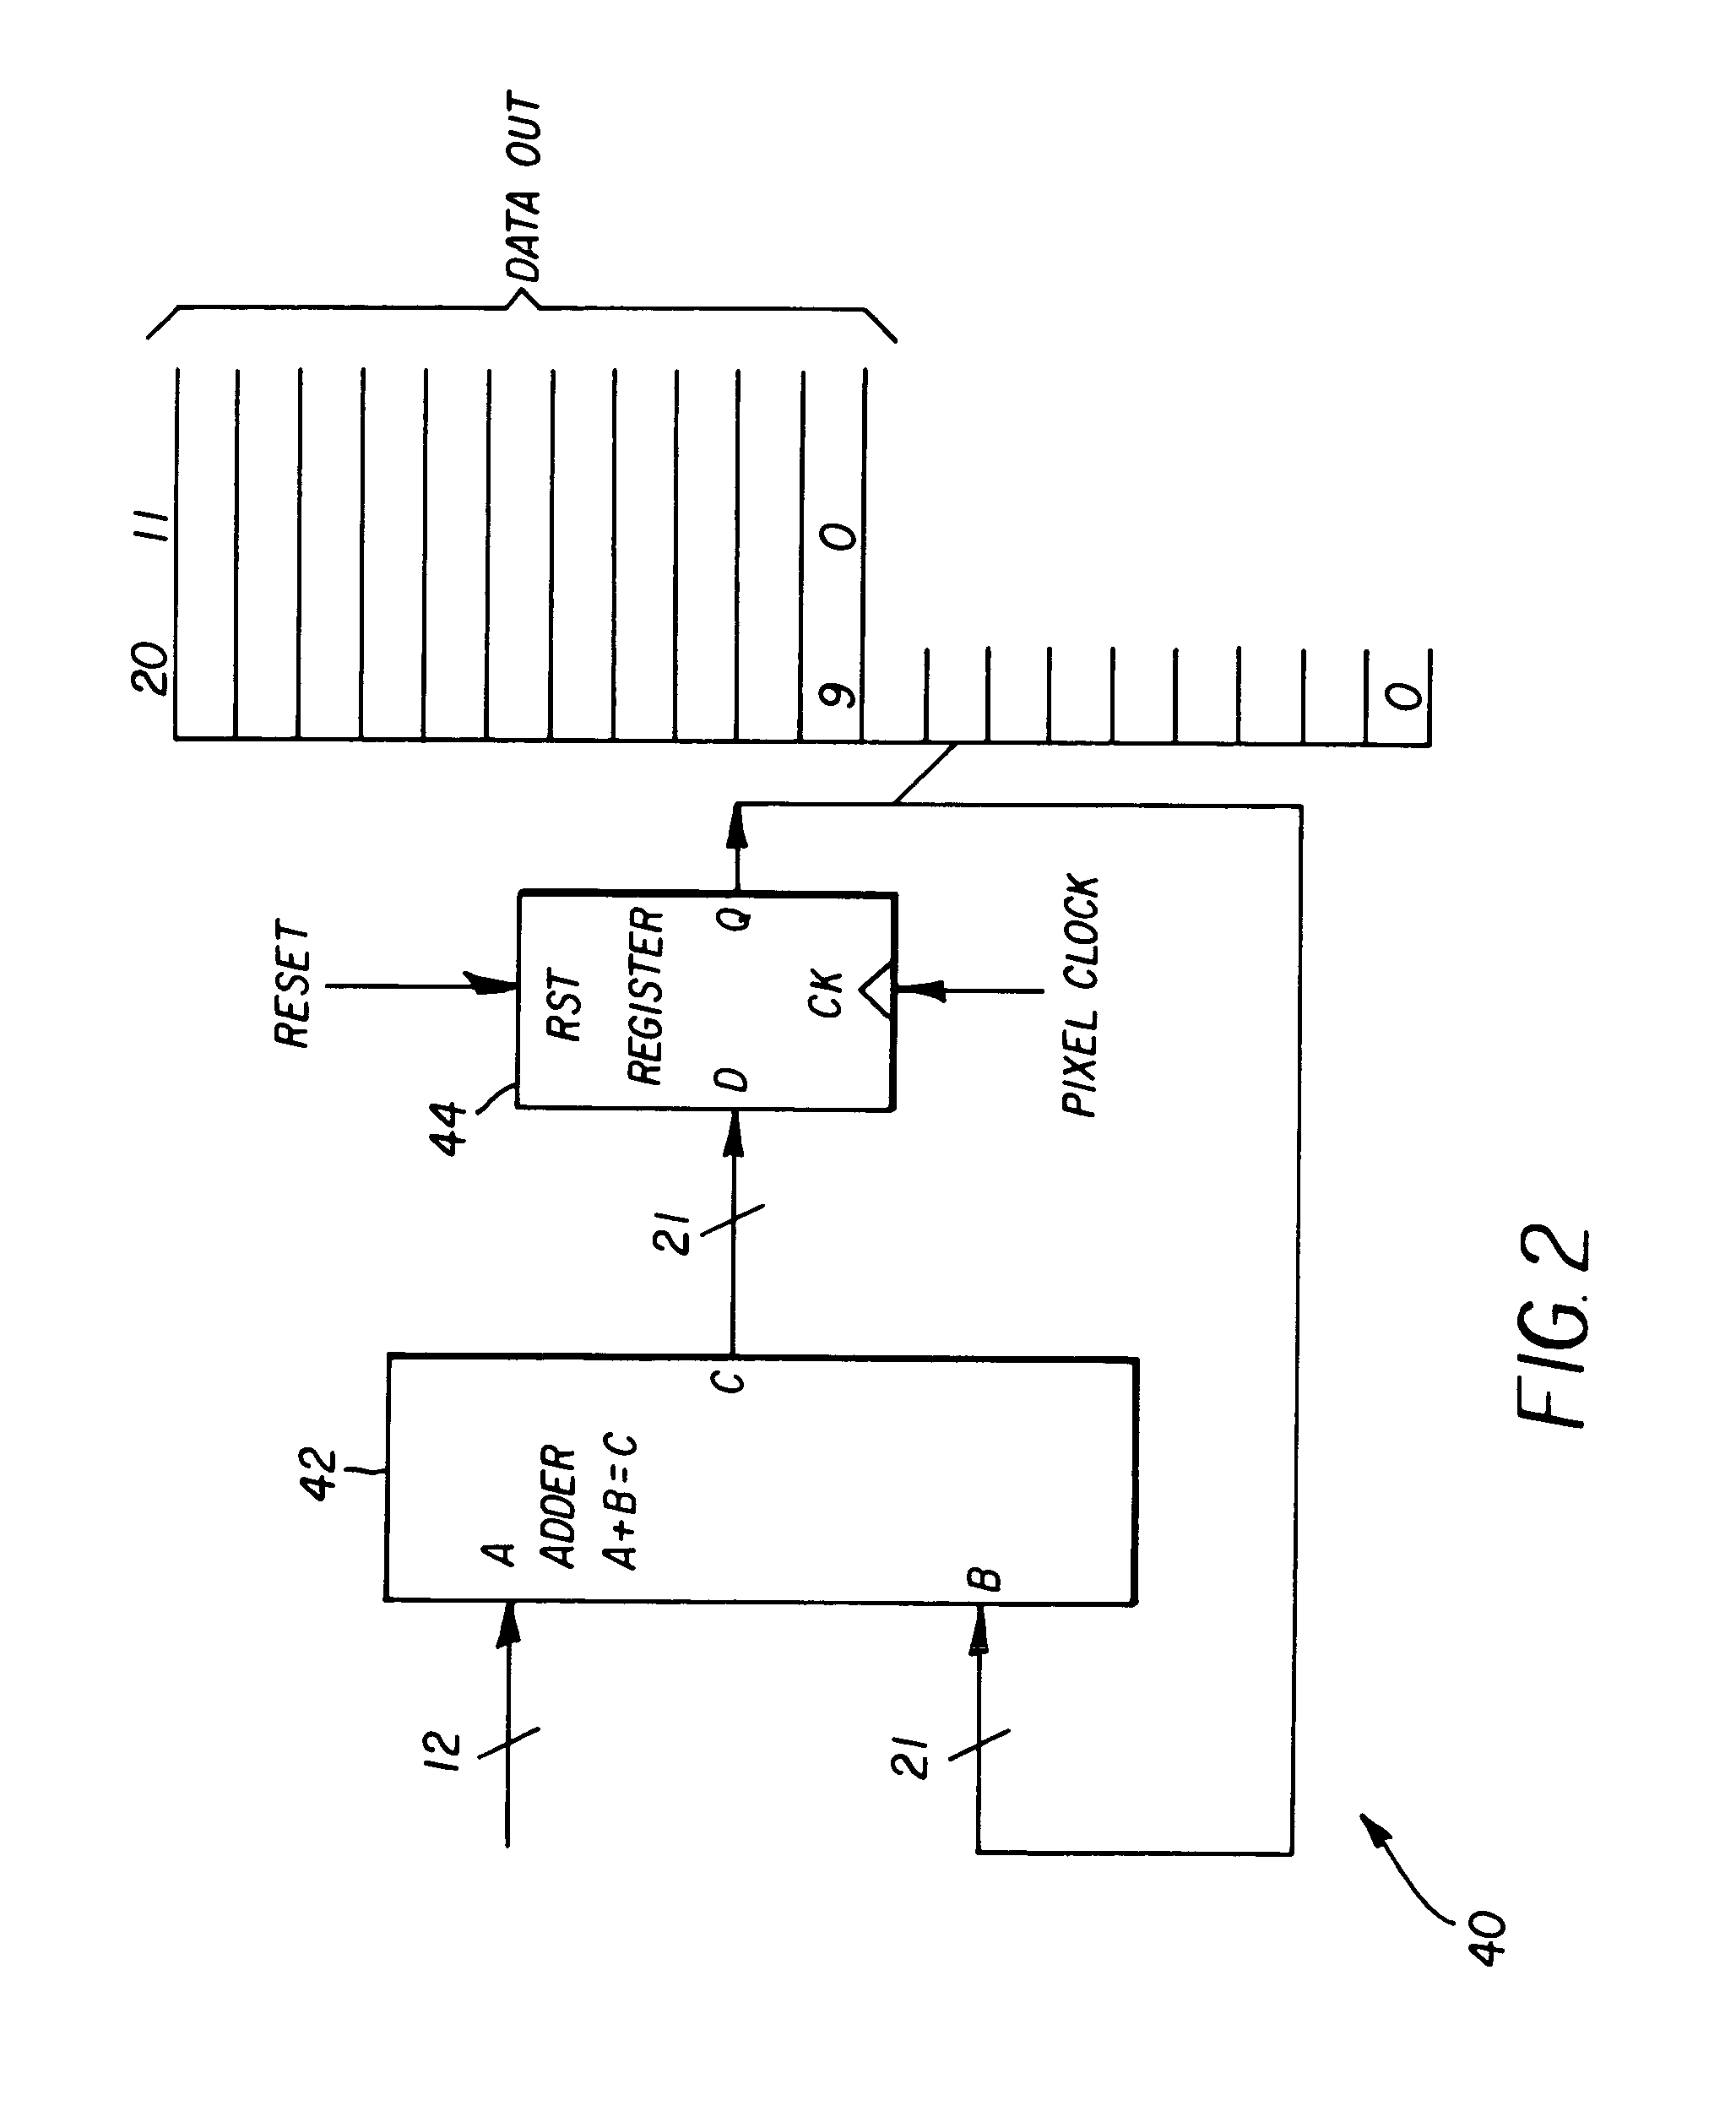 Digital black clamp circuit in electronic imaging systems